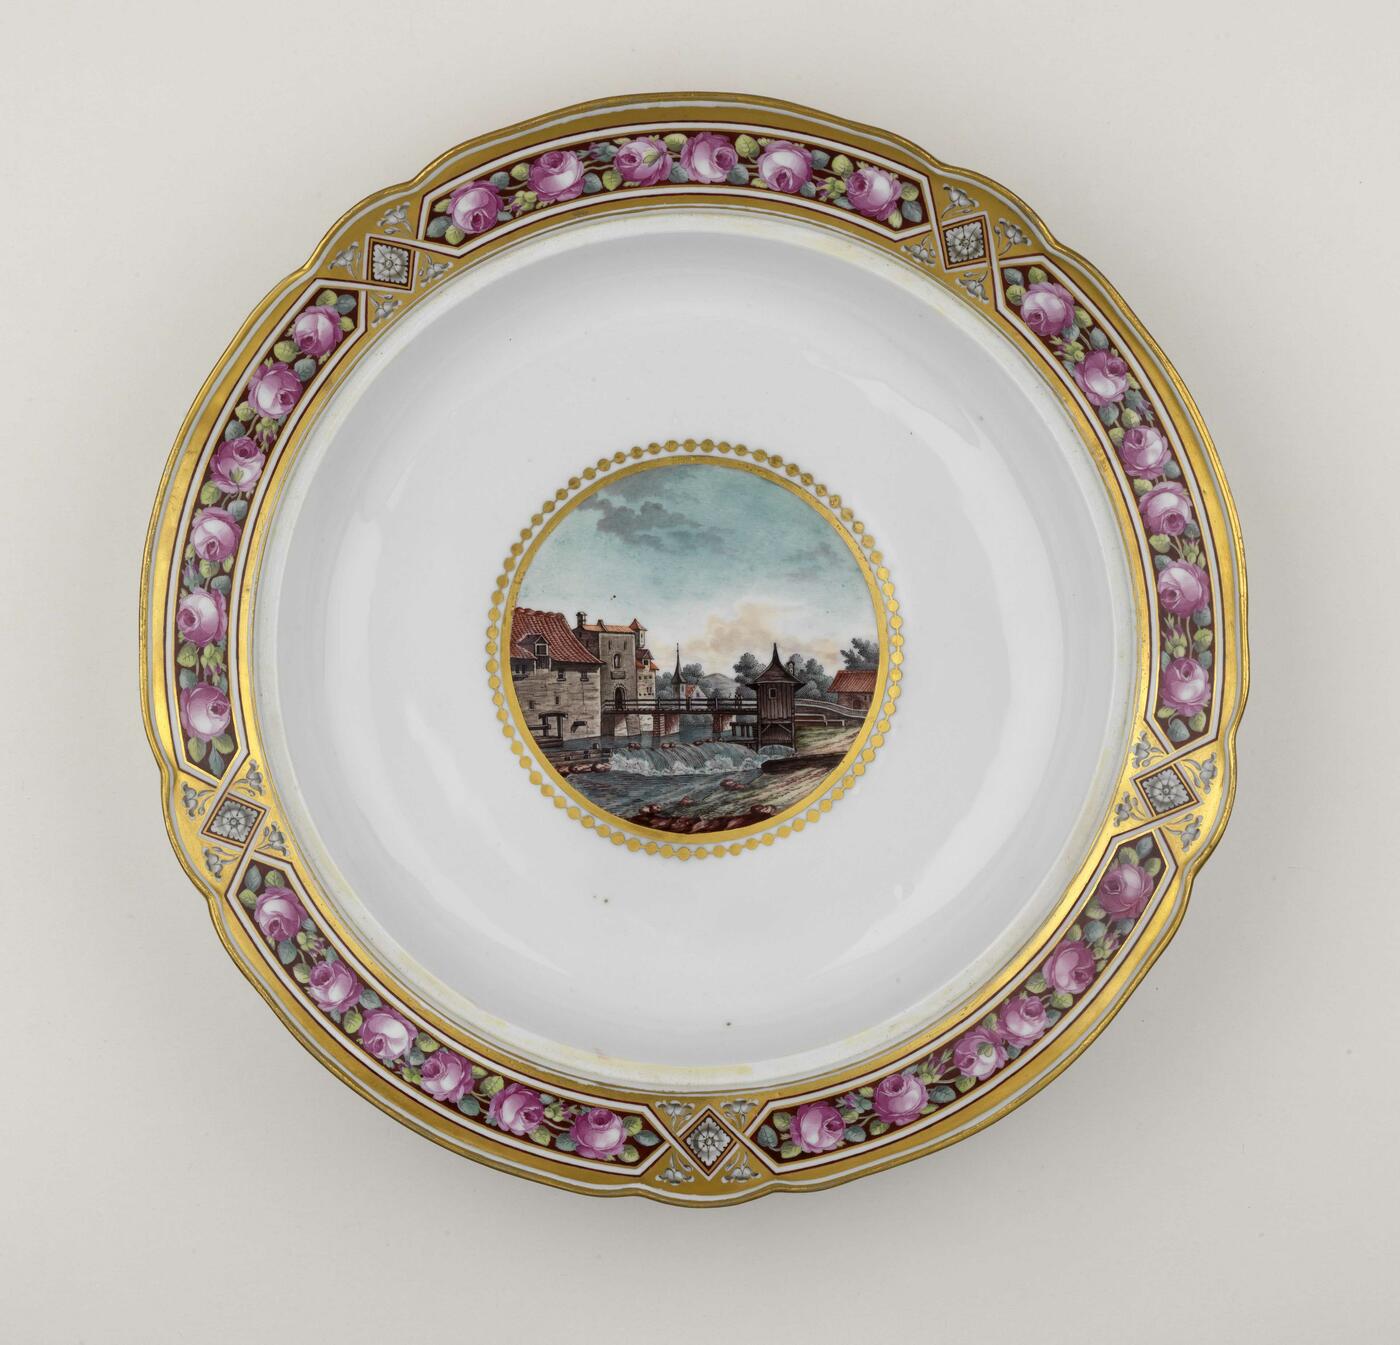 IMPERIAL PORCELAIN MANUFACTORY, ST PETERSBURG, PERIOD OF PAUL I (1796-1801)